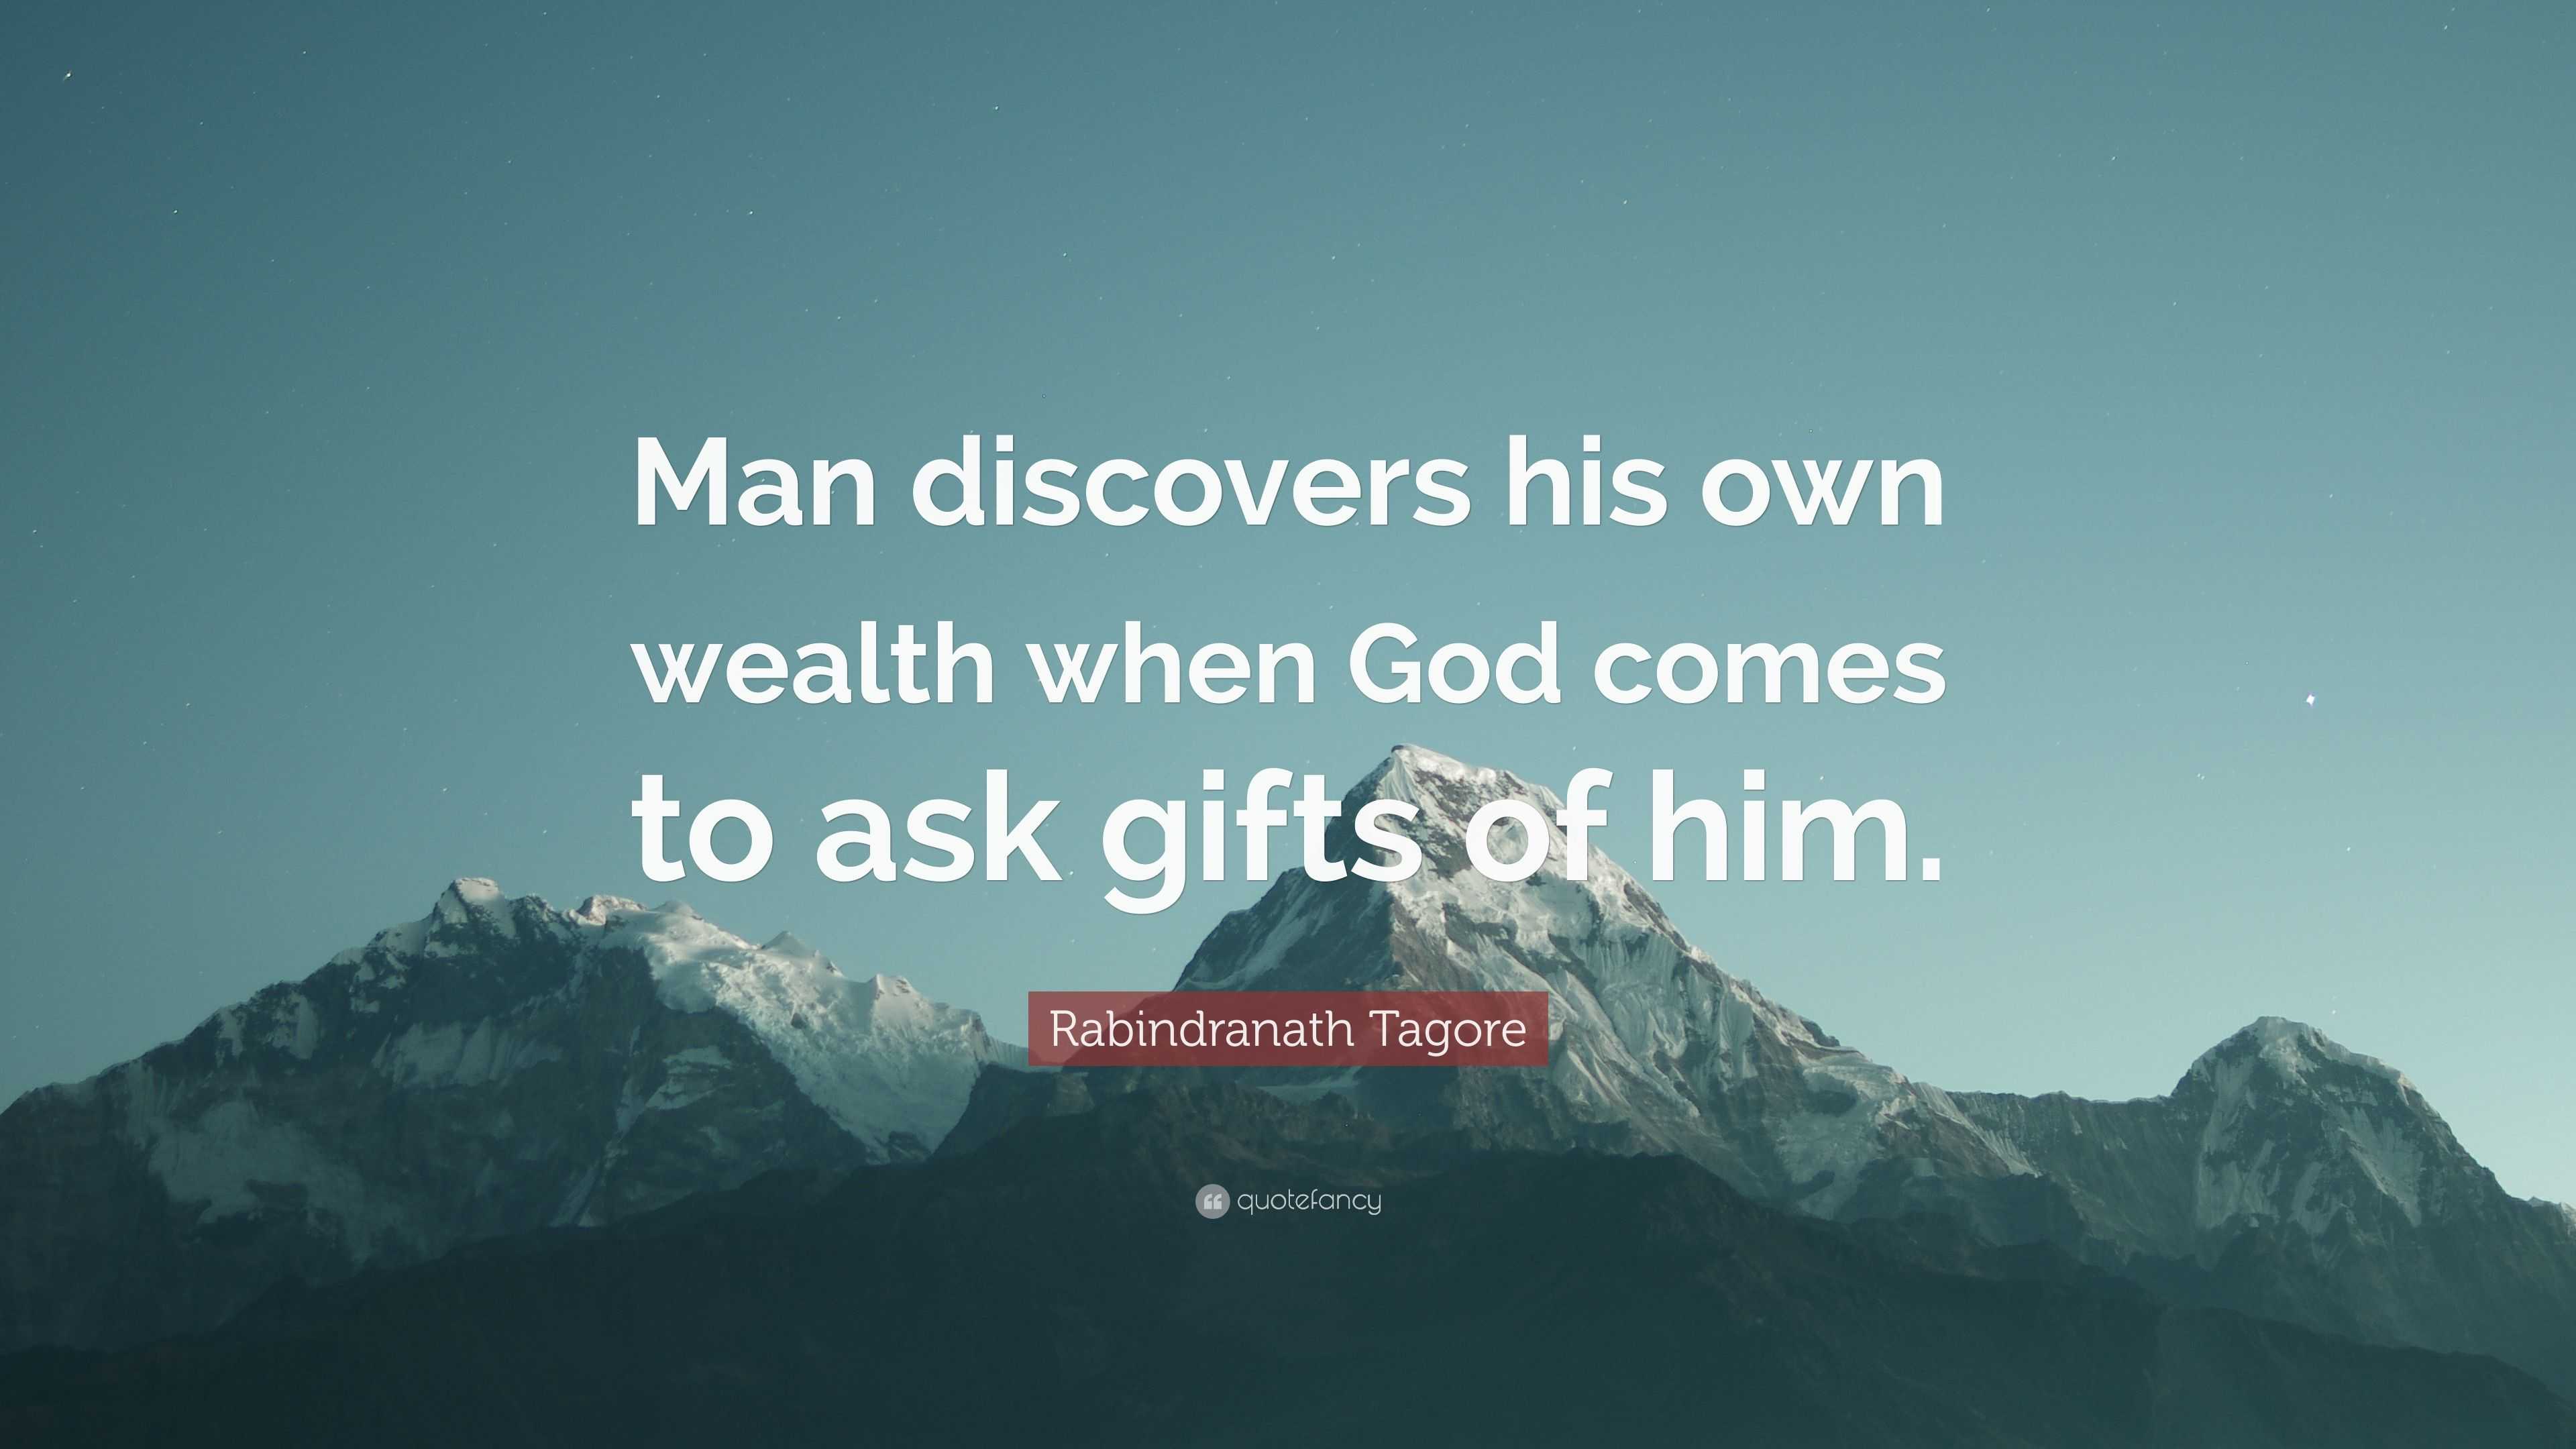 Rabindranath Tagore Quote: “Man discovers his own wealth when God comes to  ask gifts of him.”